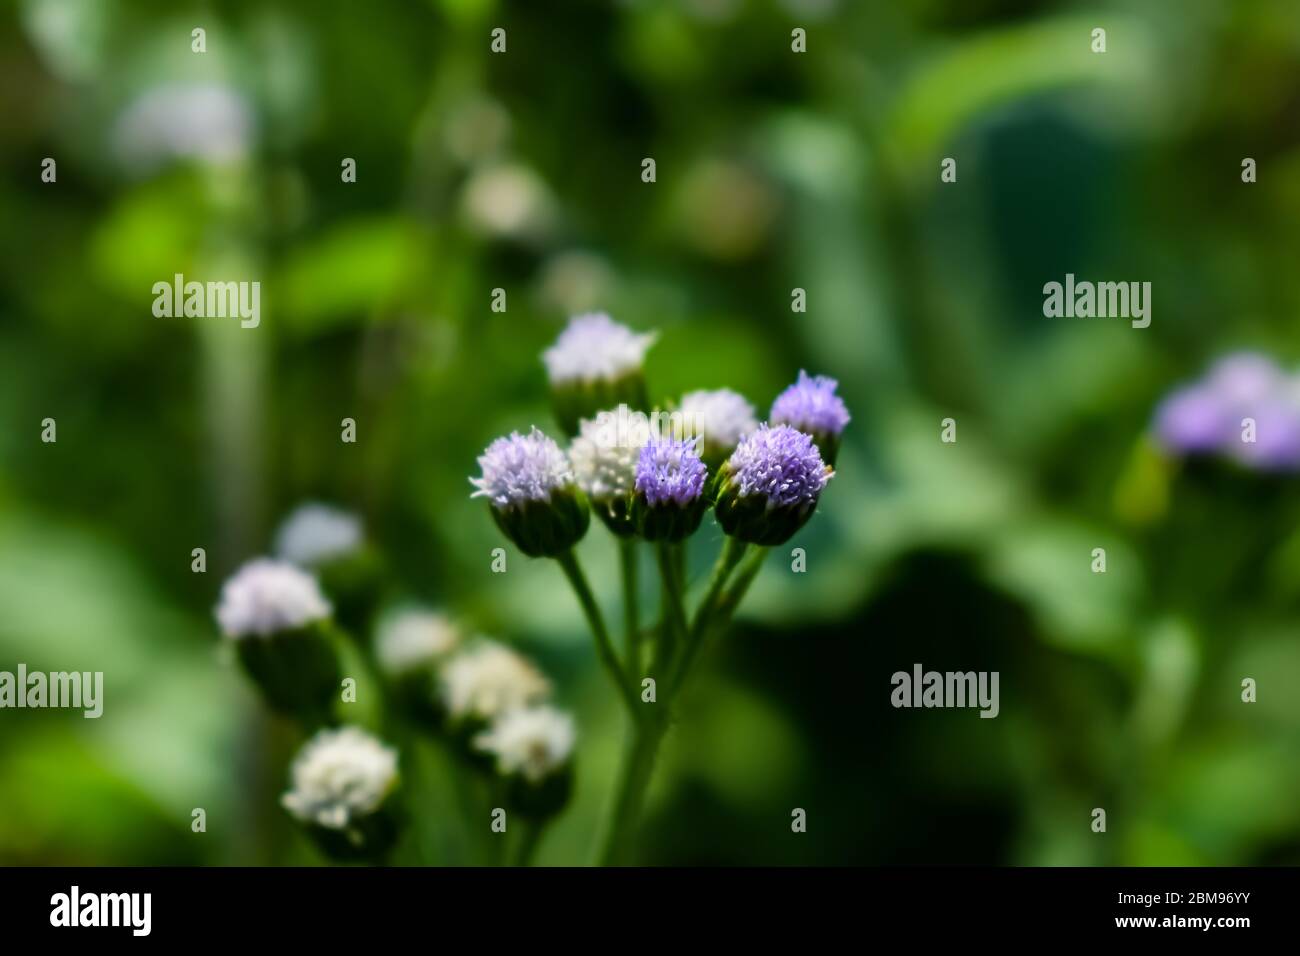 Ageratum conyzoides is native to Tropical America, especially Brazil, and considered an invasiva weed in many other regions. Stock Photo